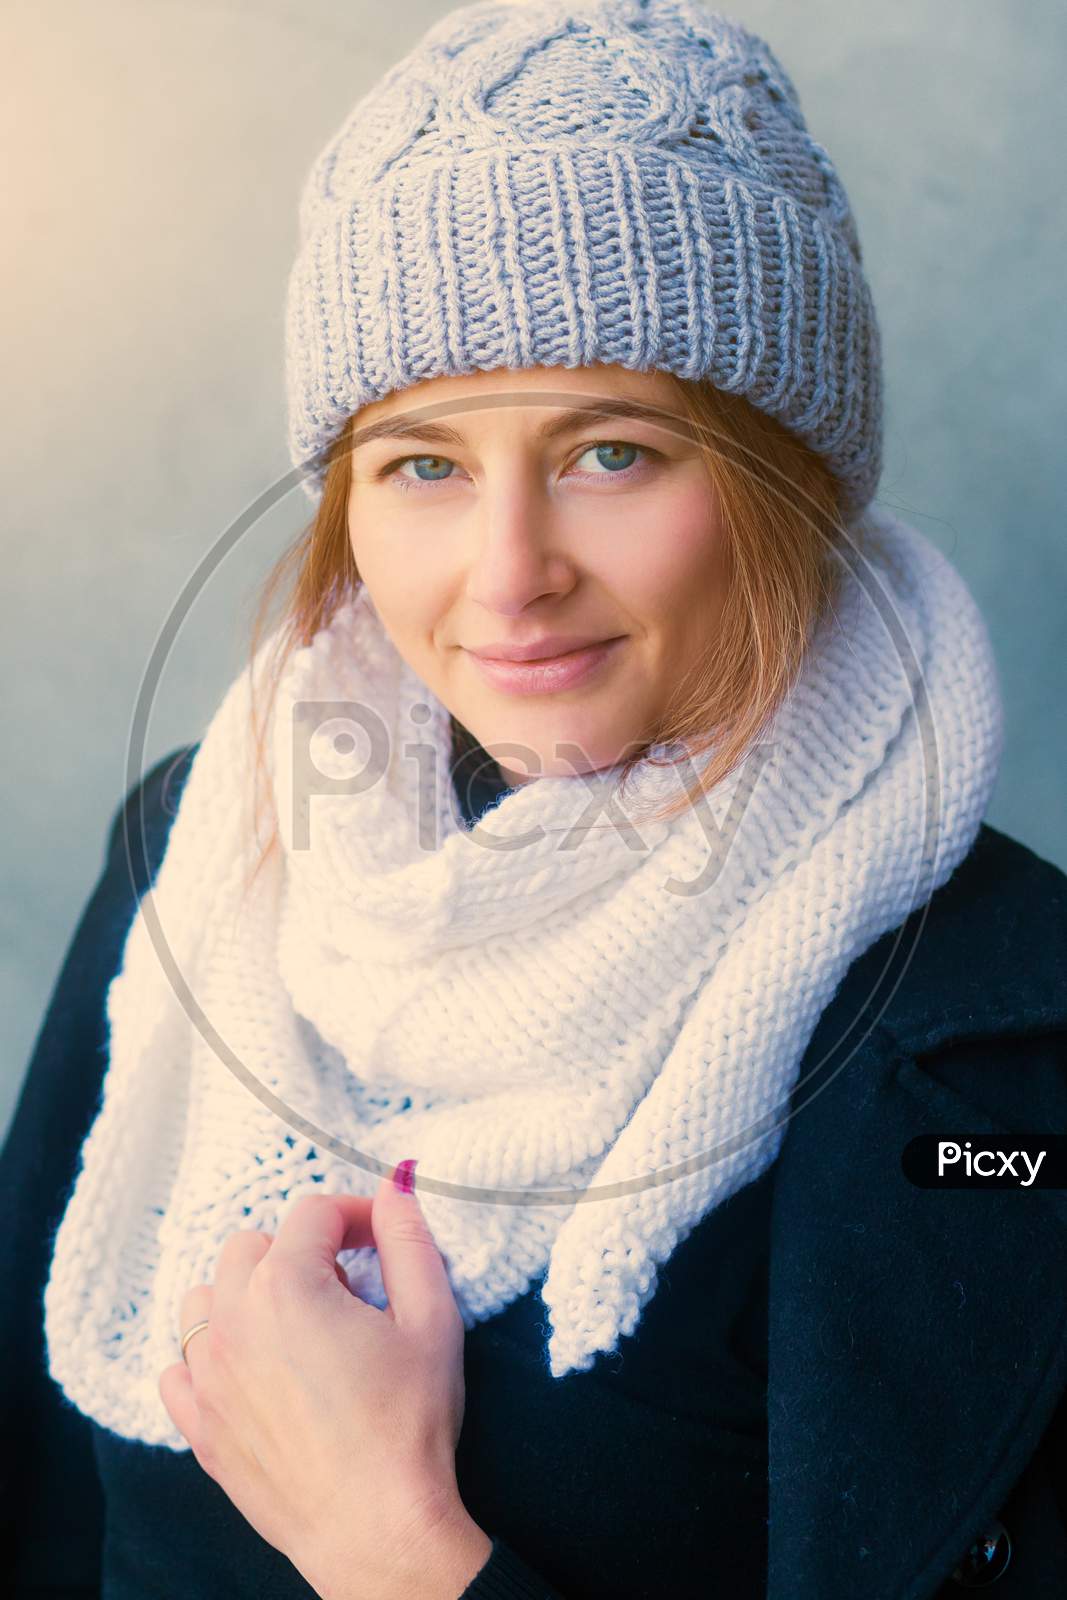 Portrait Of A Beautiful Young Woman With Dark Hair In A Large Knitted White Bactus Scarf Made Of Natural Wool And Black Classic Сoat On The Background Of A Stone Gray Wall